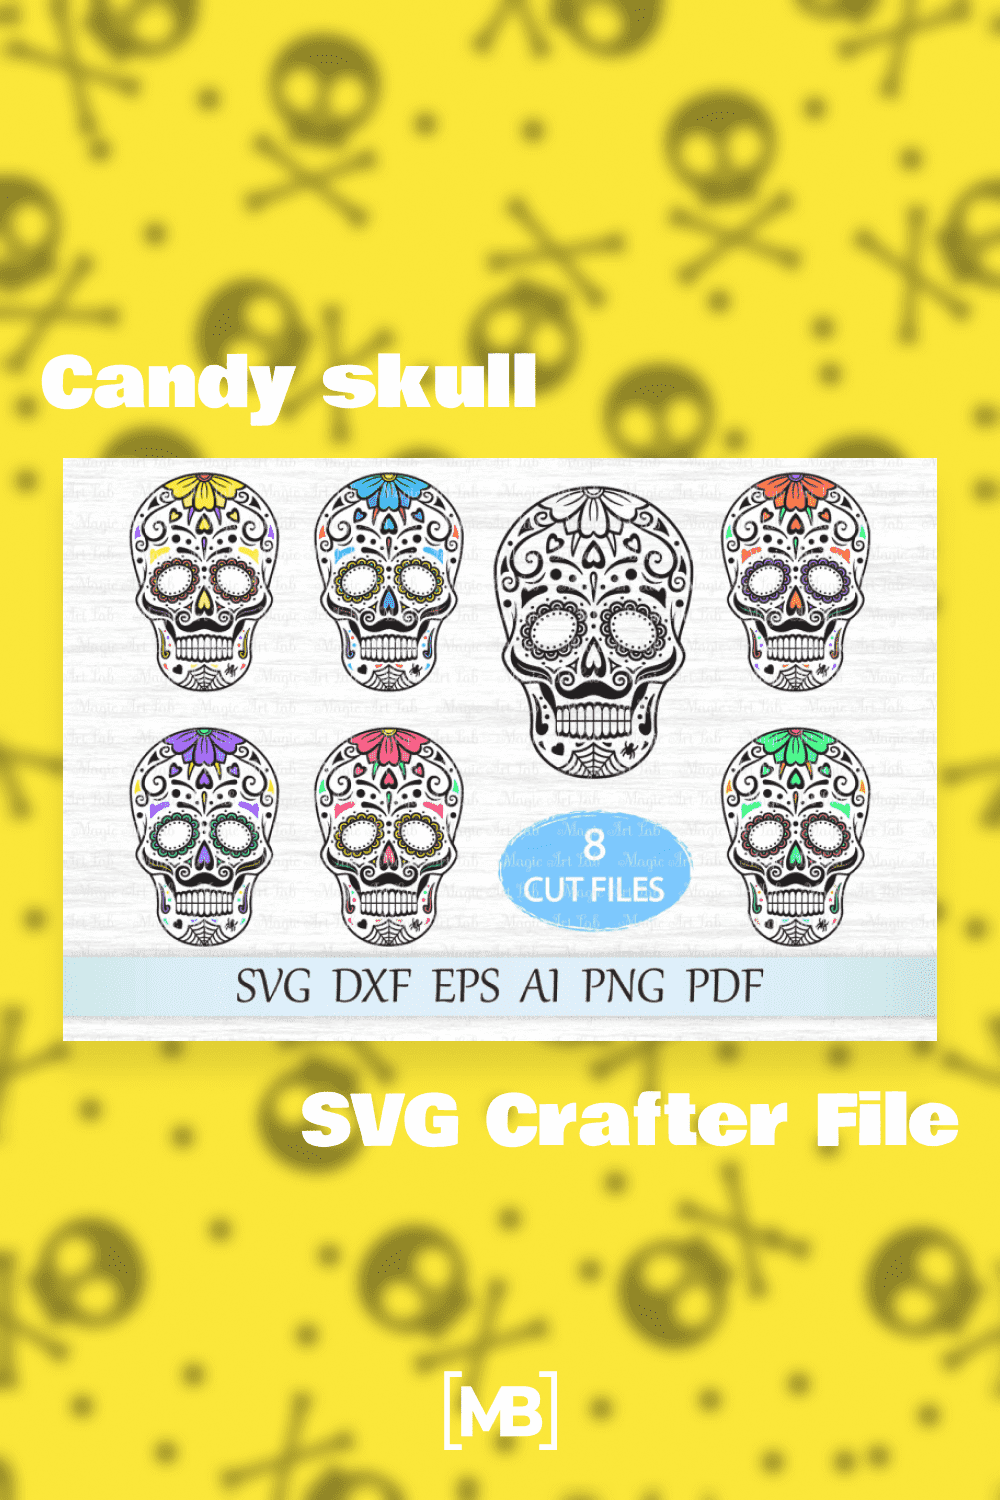 Candy skull SVG Crafter File.